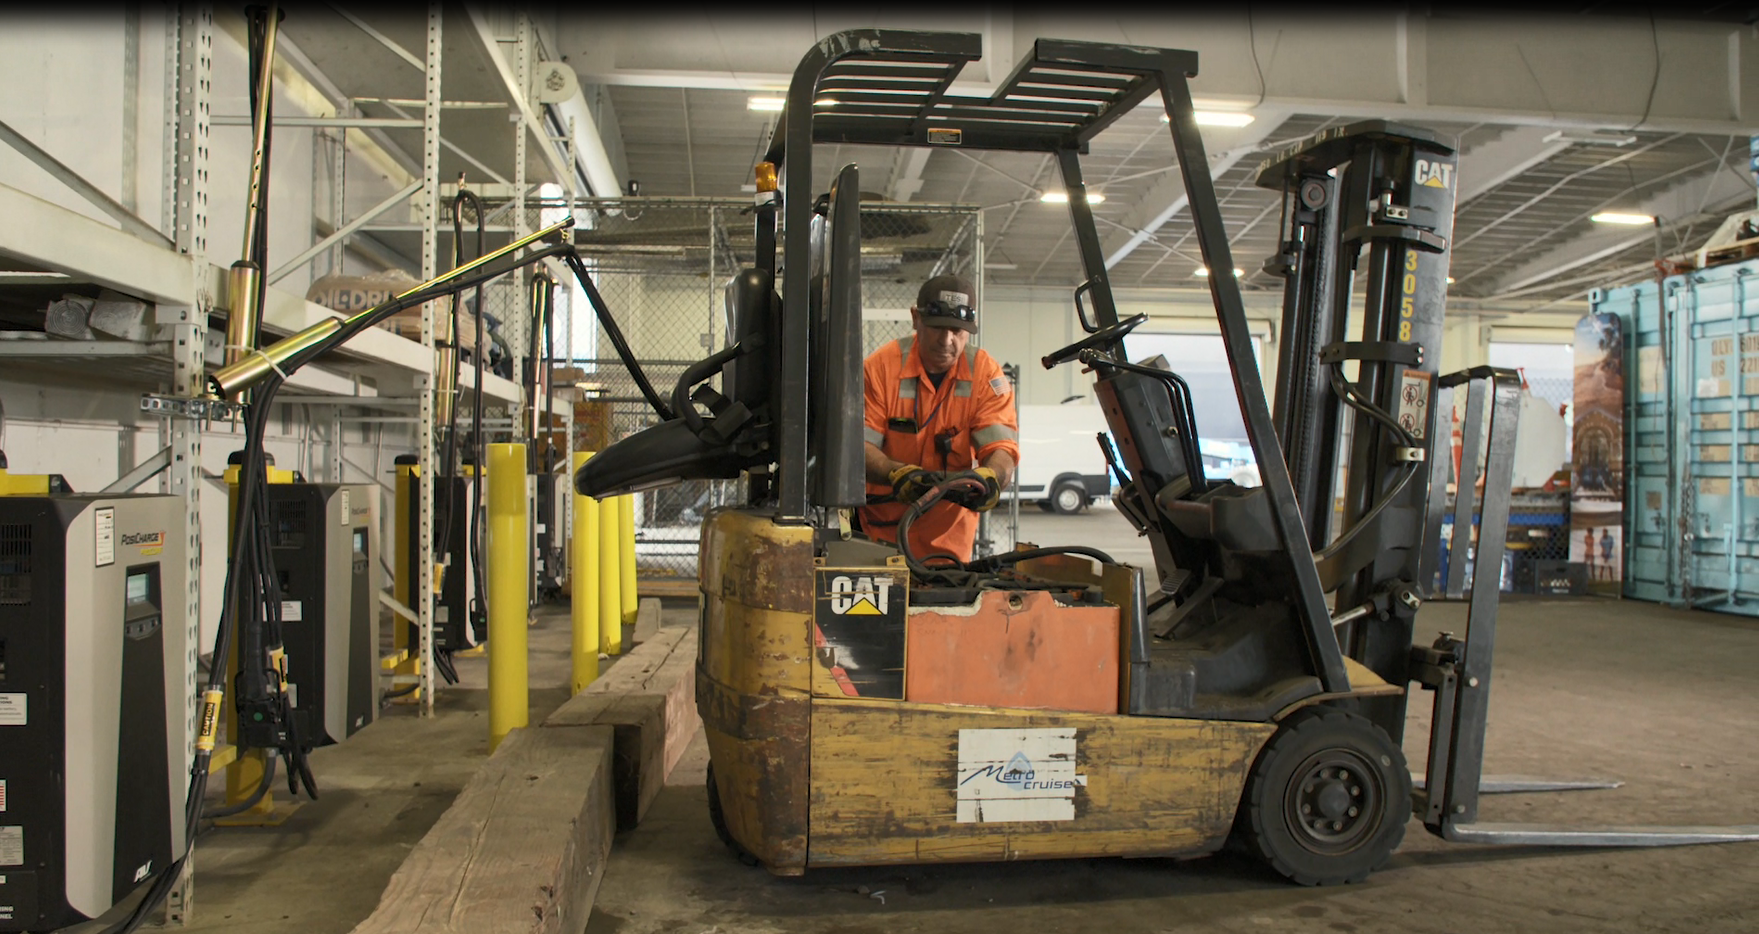 The Port's electric forklift being plugged into the new and efficient charging stations.